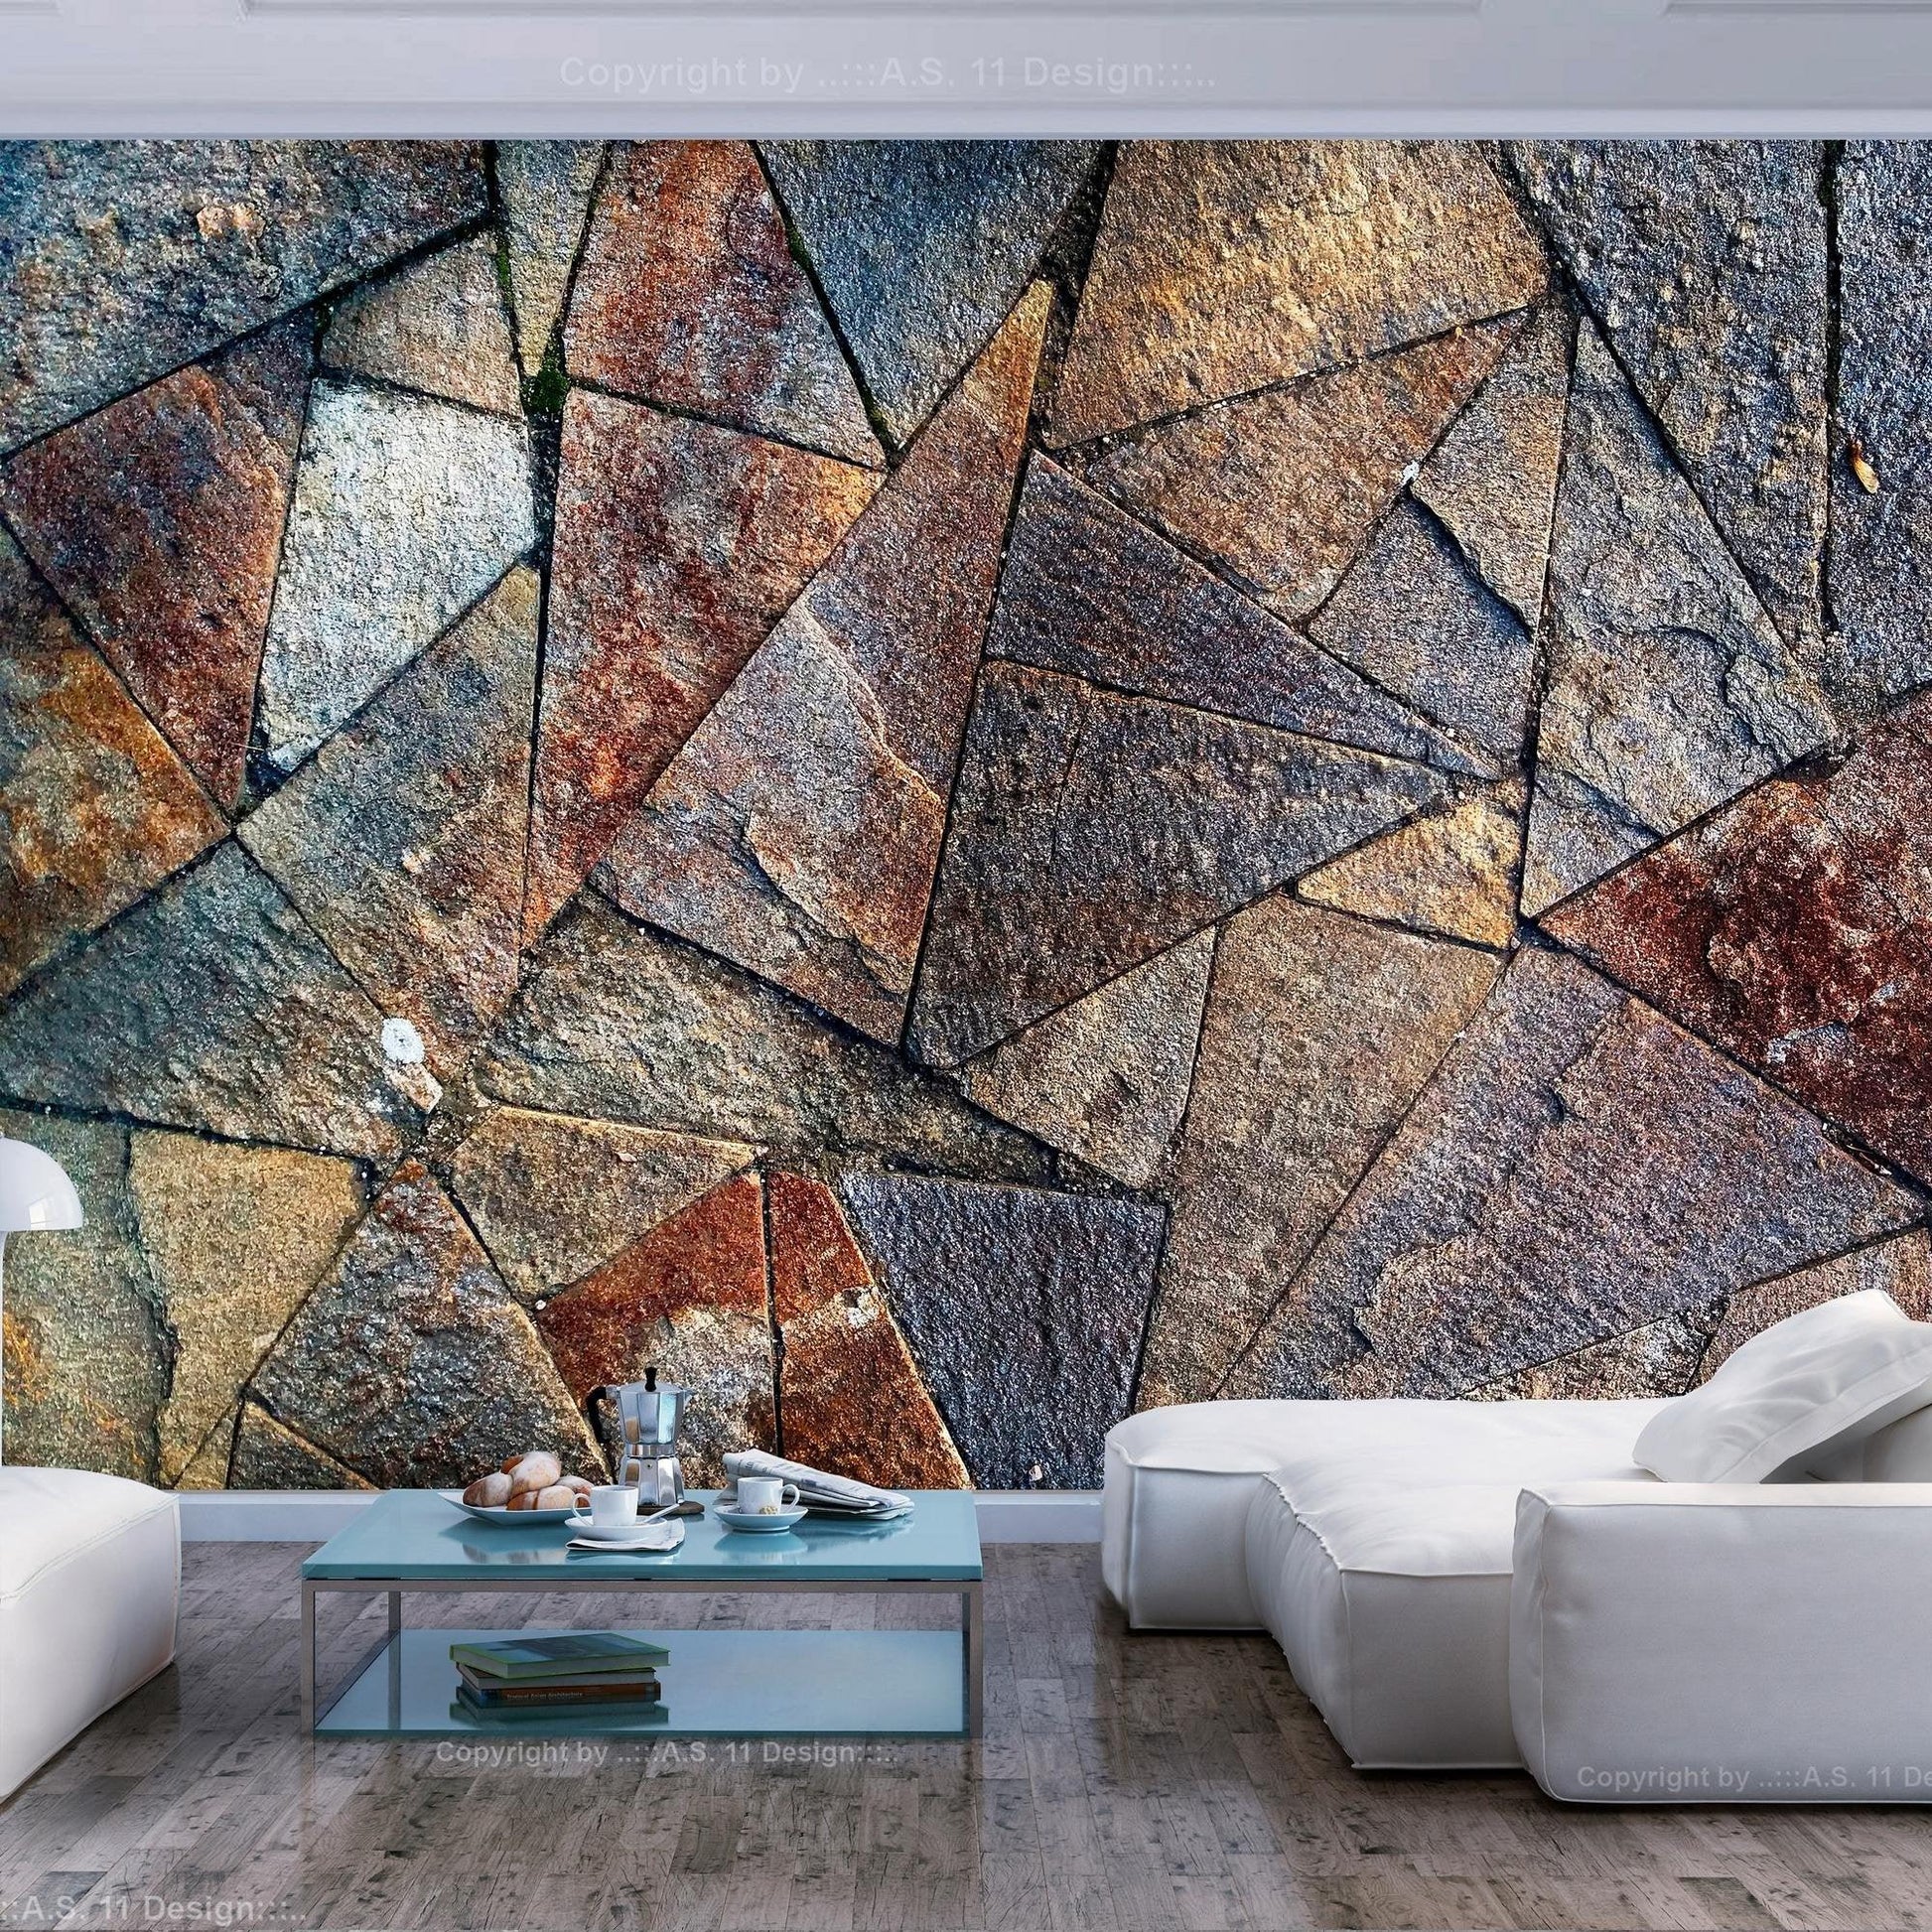 Peel and stick wall mural - Pavement Tiles (Colourful) - www.trendingbestsellers.com